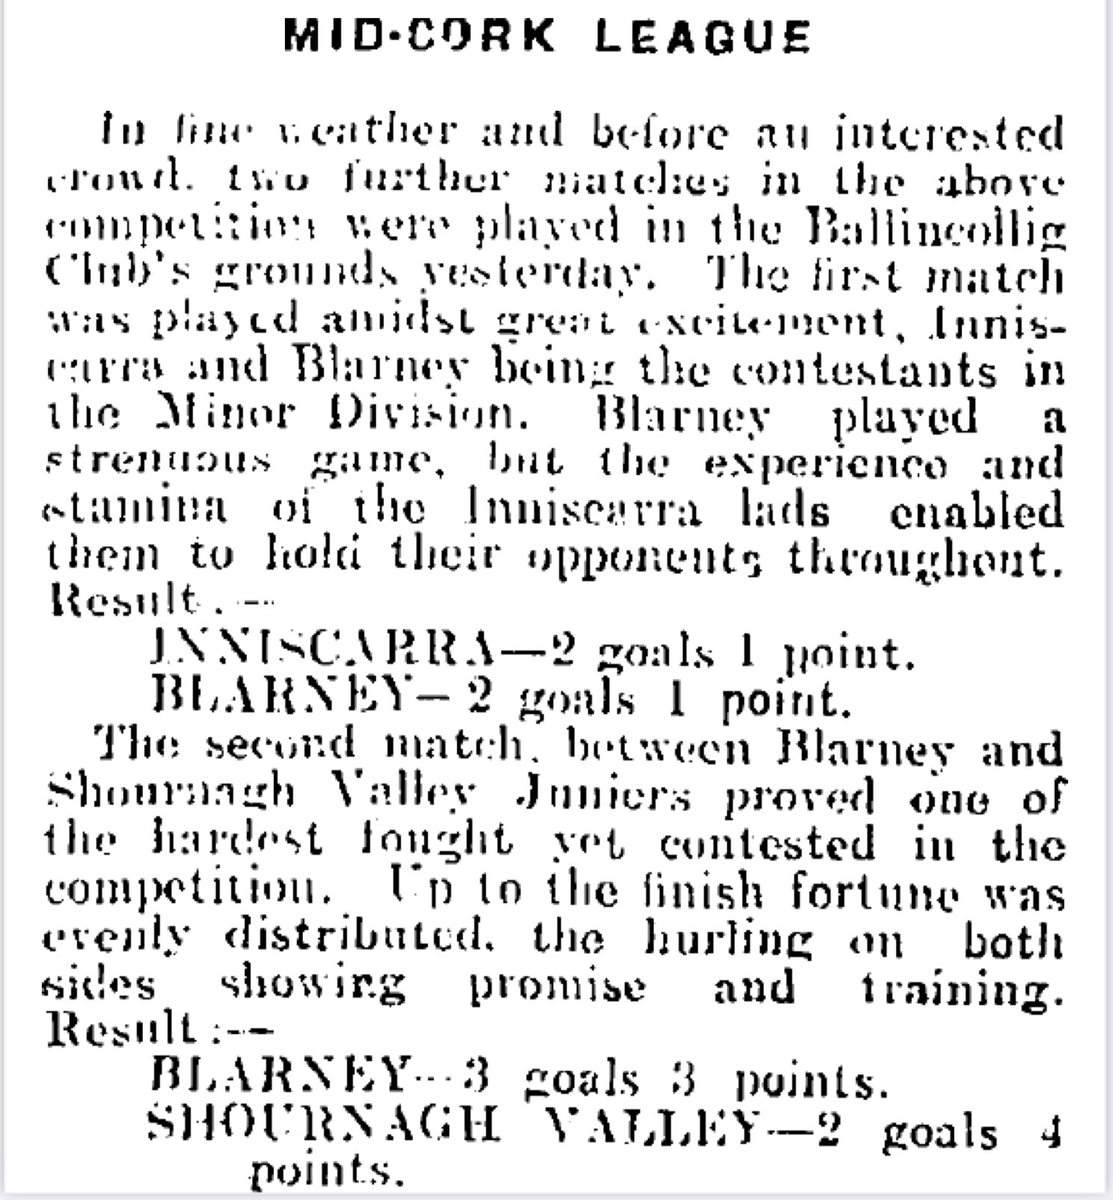 Report on two matches in the Mid-Cork Junior and Minor Hurling Leagues on this day in 1927 at Ballincollig, with victories for @BlarneyGAA over Shournagh Valley in the Junior grade and @BlarneyGAA and @ScarraGAA playing out a draw in the Minor grade #corkhurlinghistory